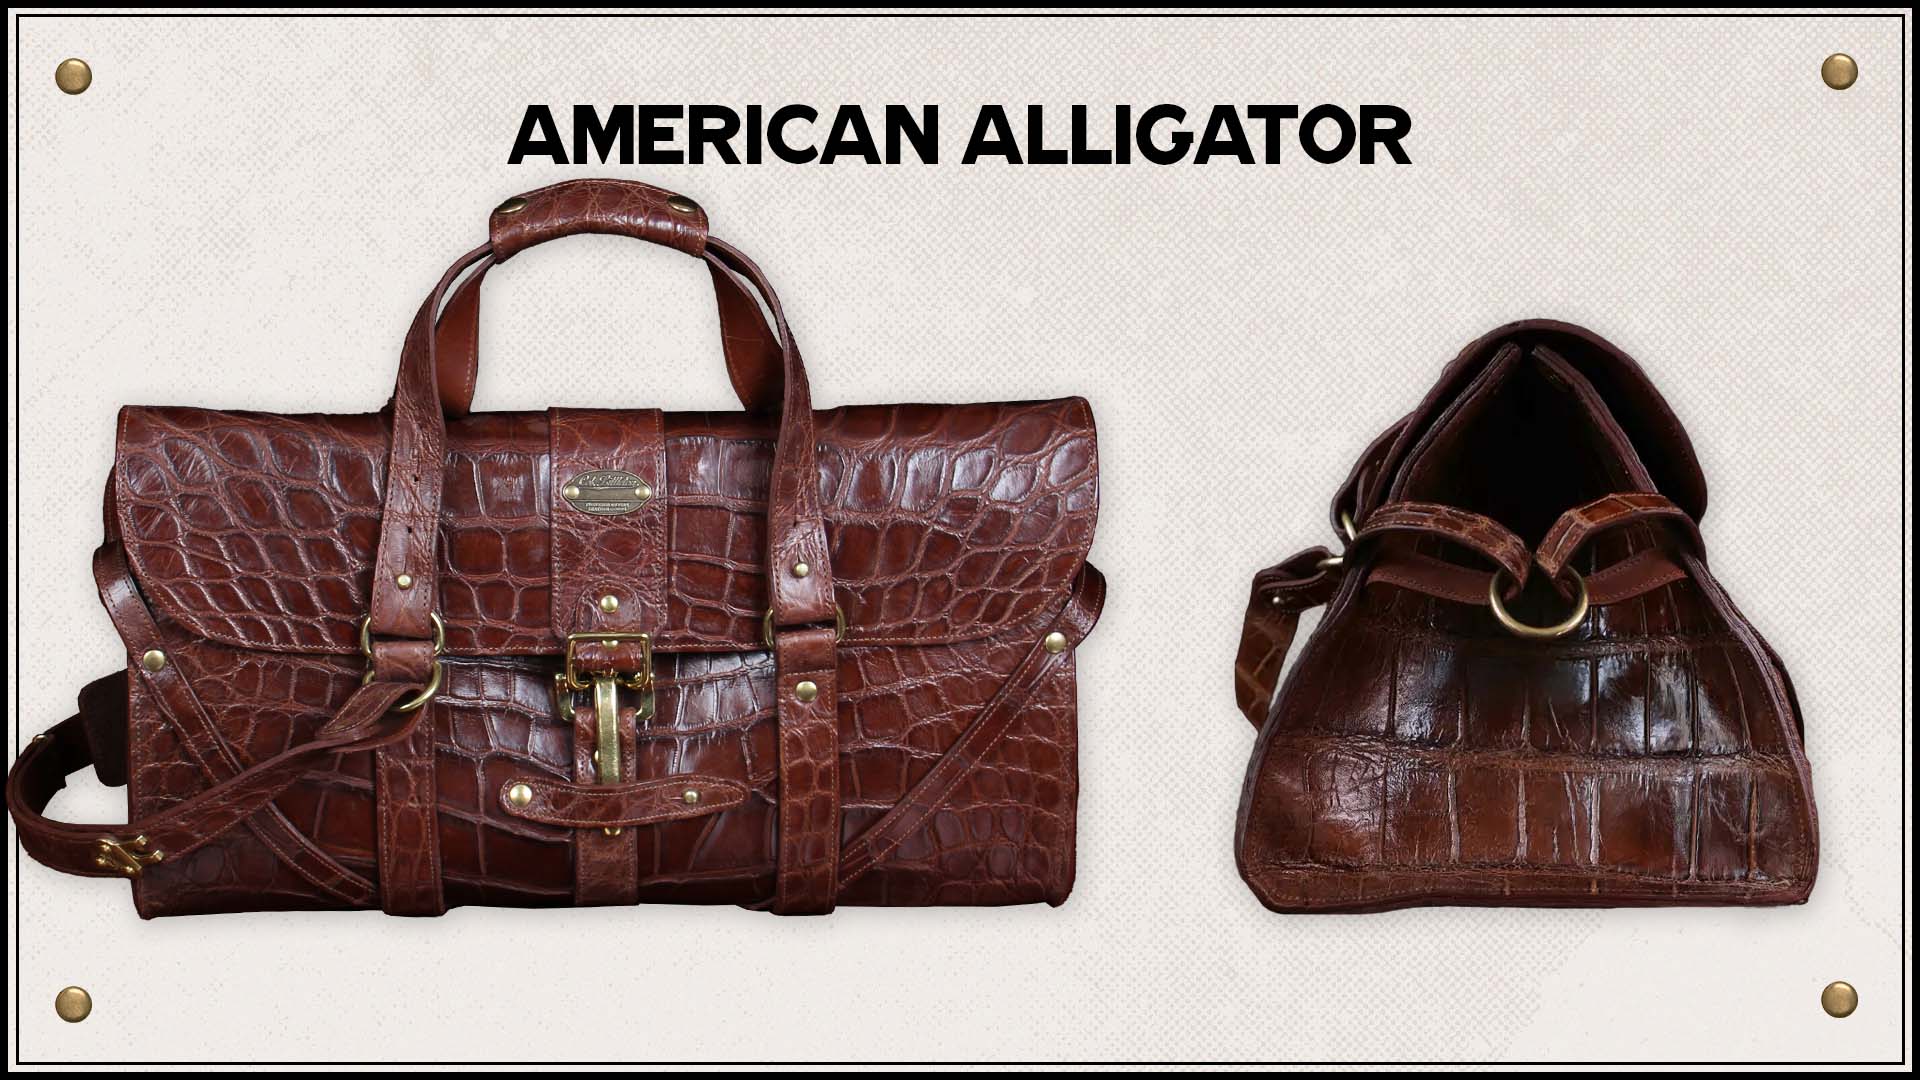 No. 1 Grip Bag front and side view in American Alligator leather